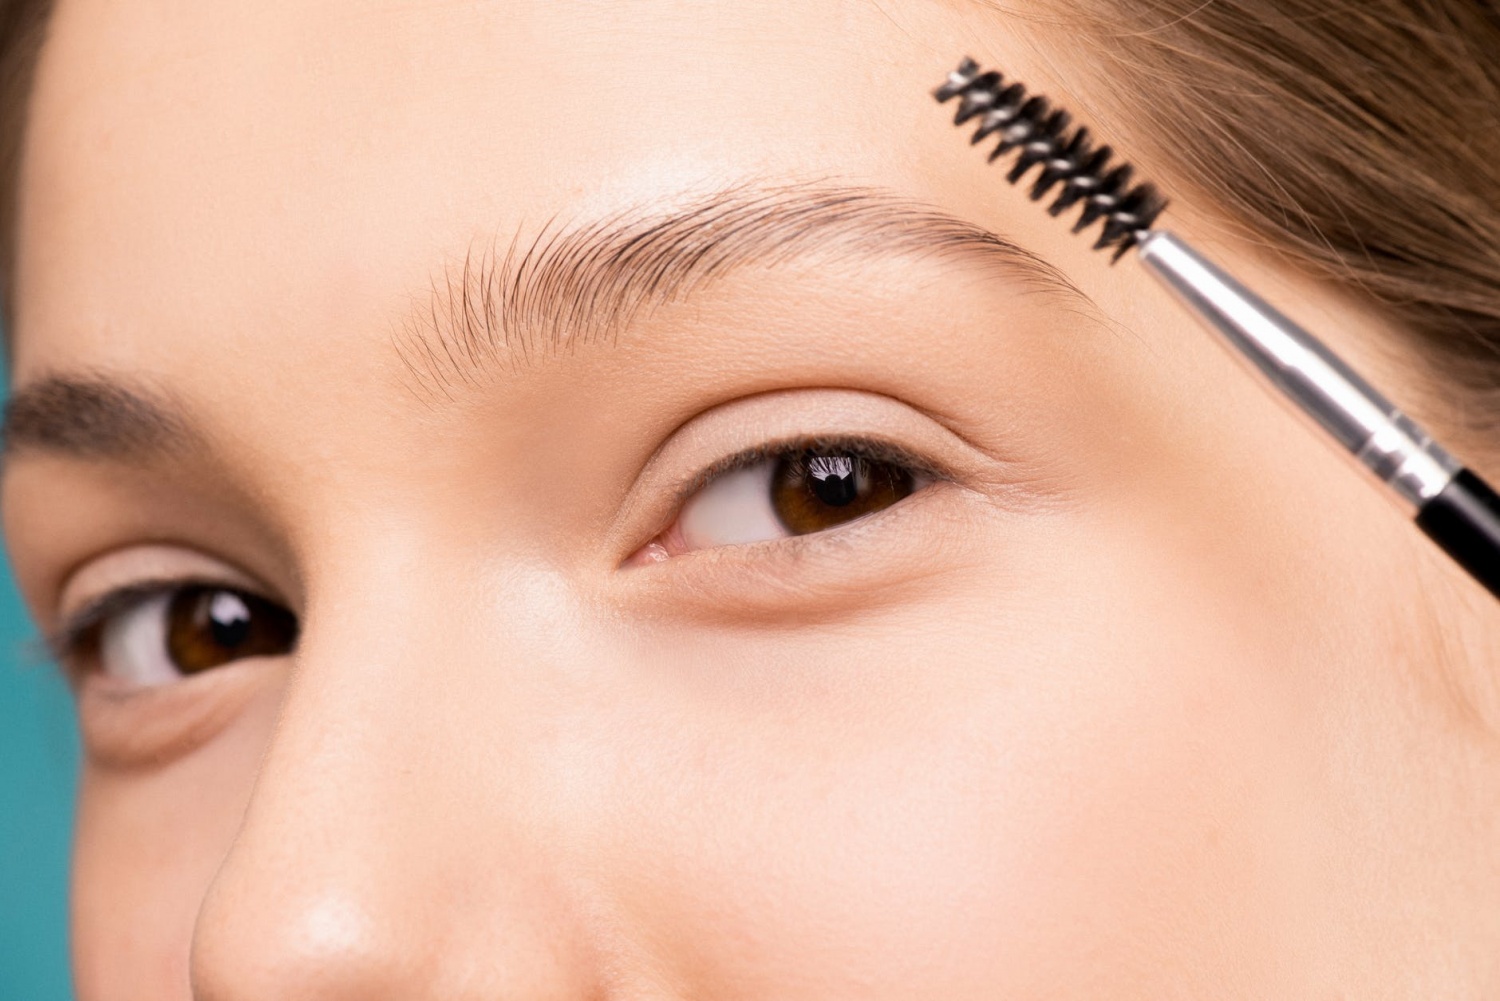 Pro Brow: 3 Tools You Need For The Perfect Eyebrow!